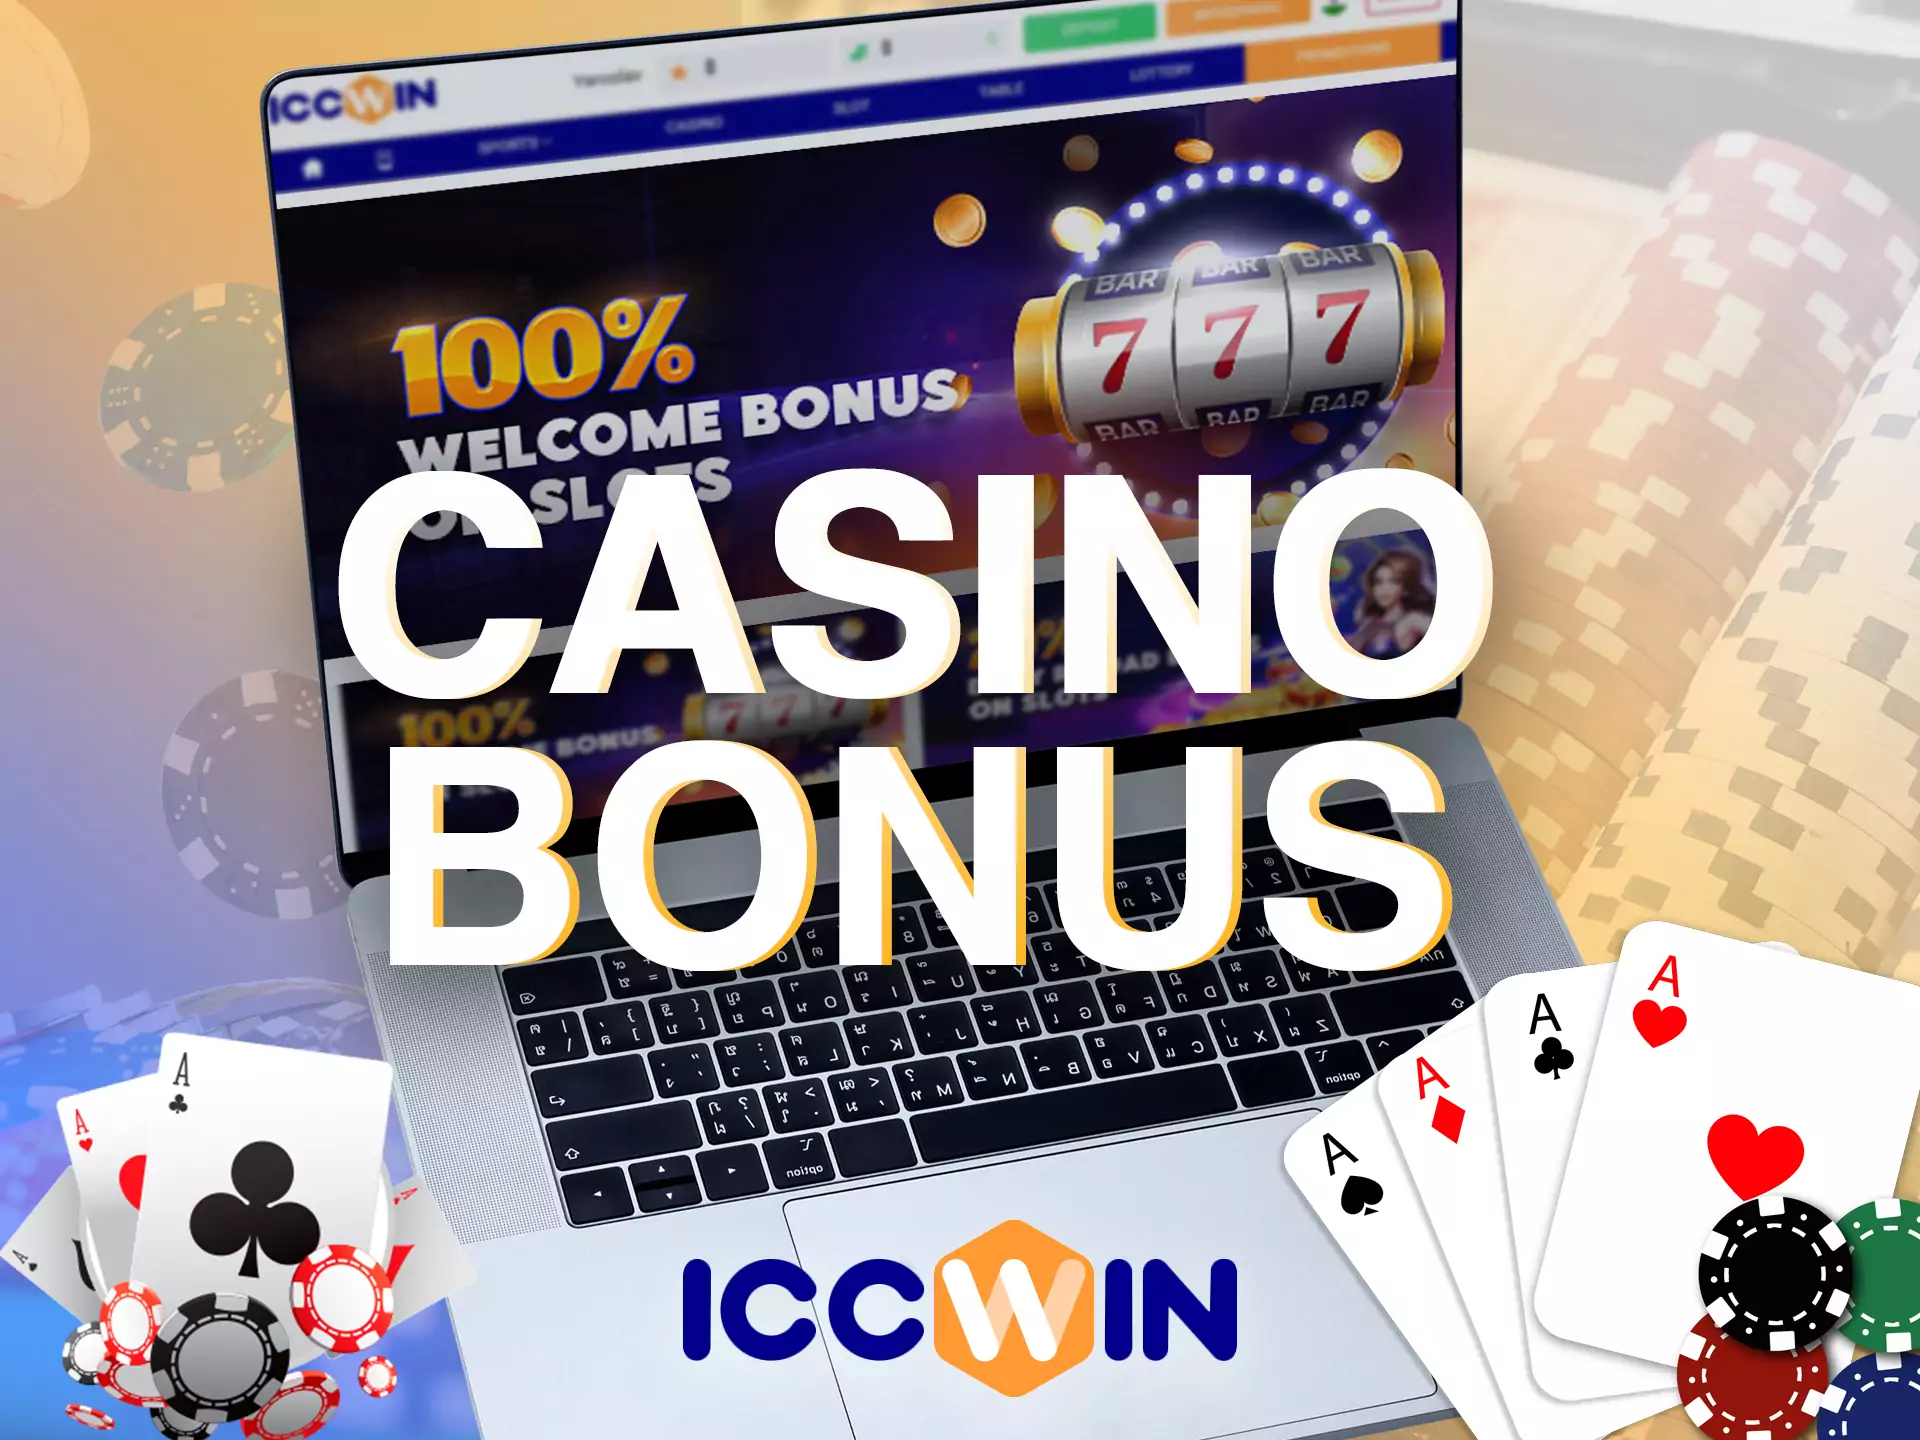 New users get a welcome bonus that can be used on playing games in the ICCWin casino.